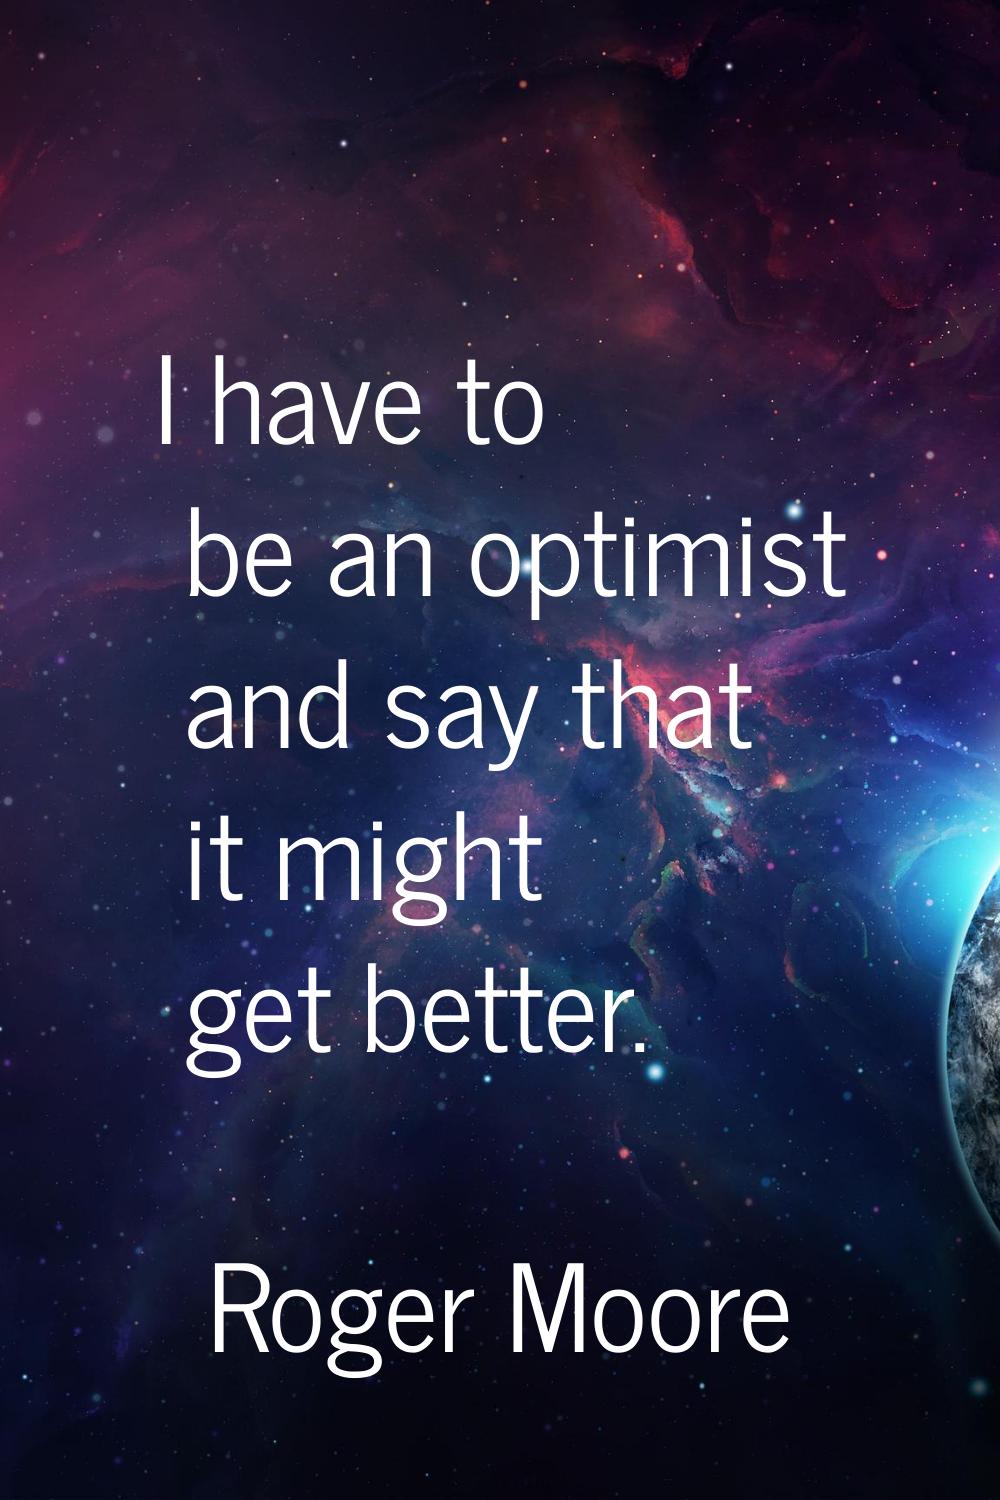 I have to be an optimist and say that it might get better.